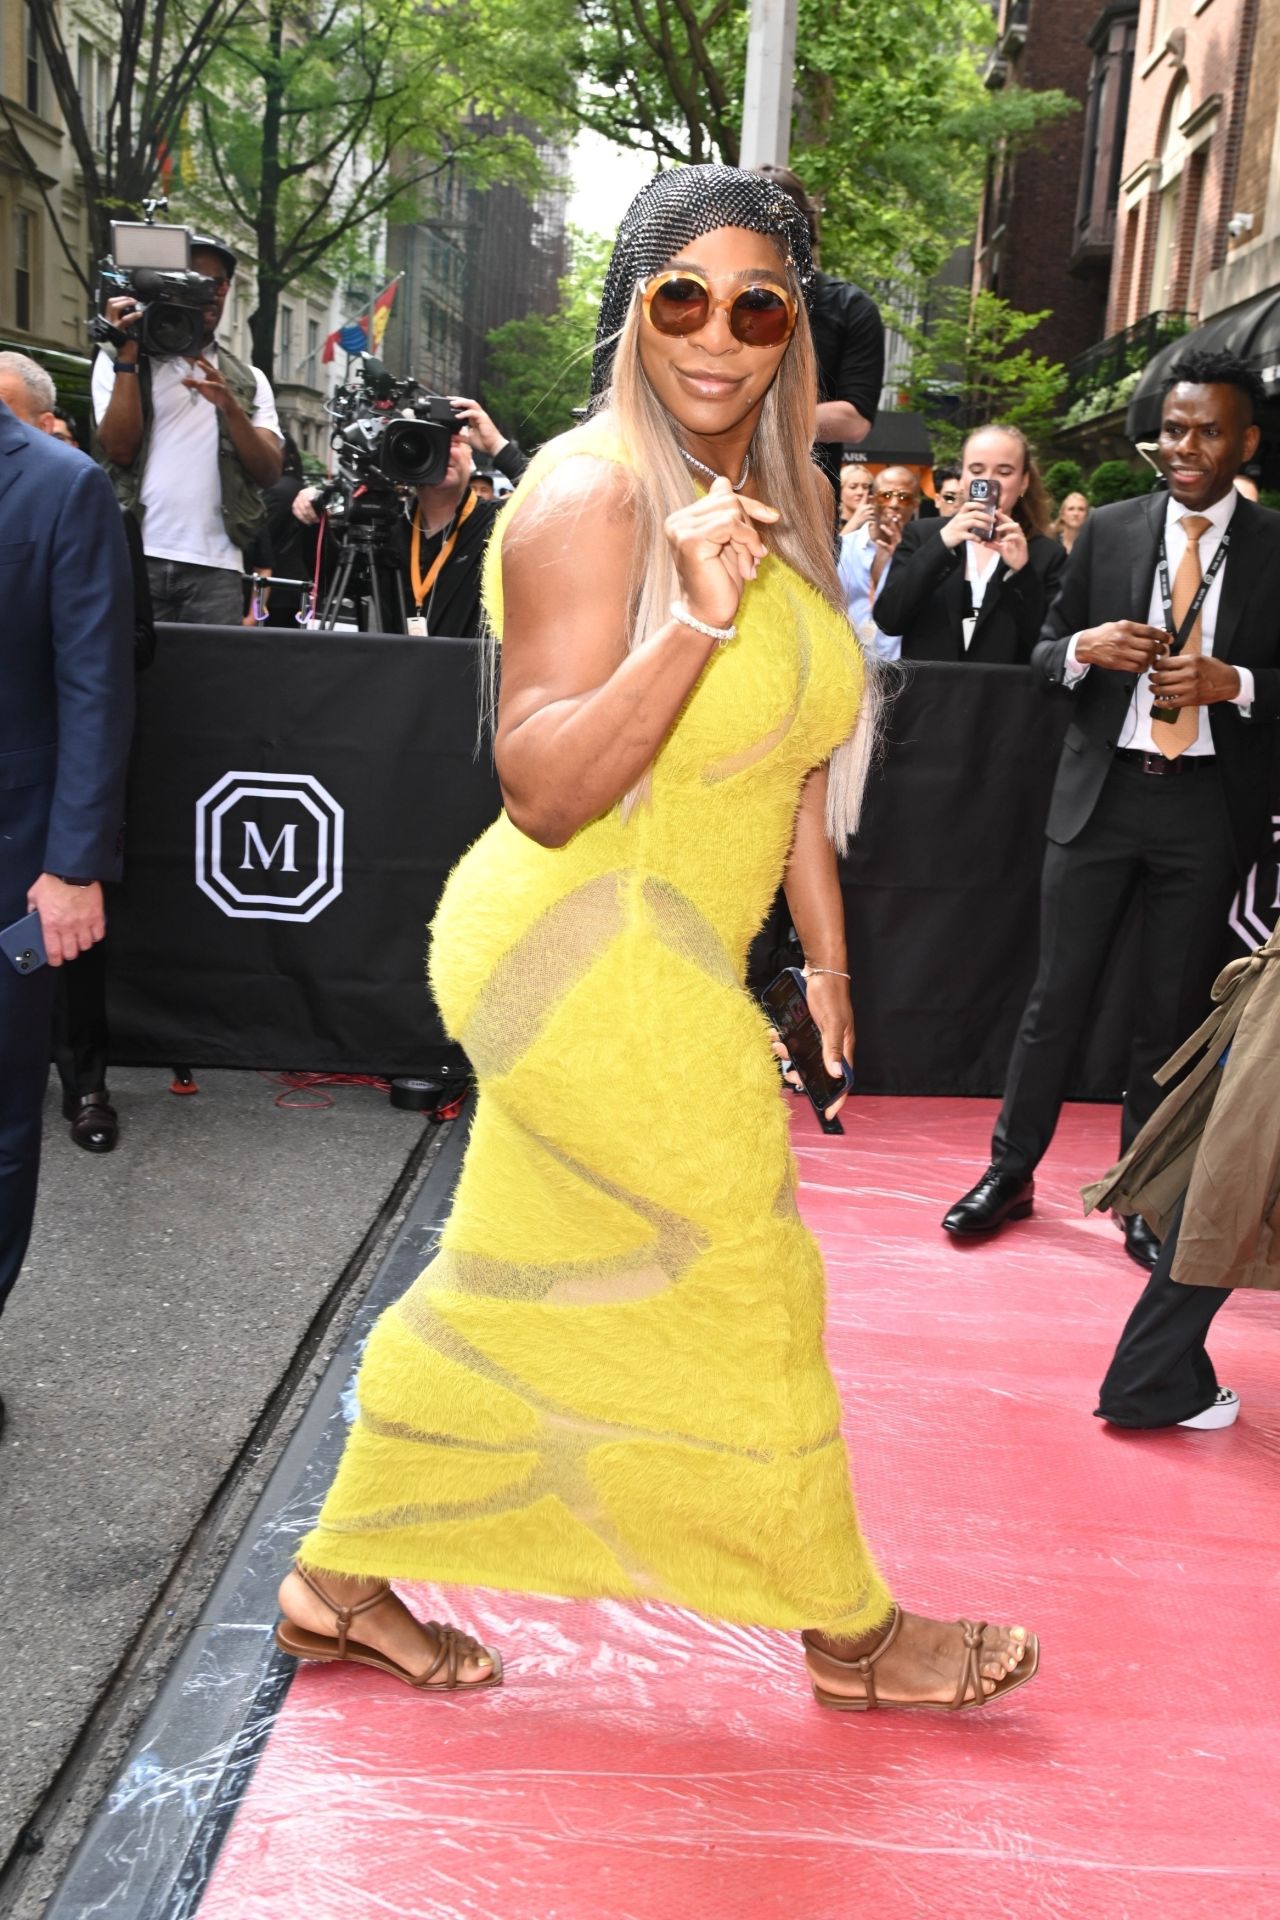 SERENA WILLIAMS IN A BRIGHT YELLOW DRESS IN NEW YORK1